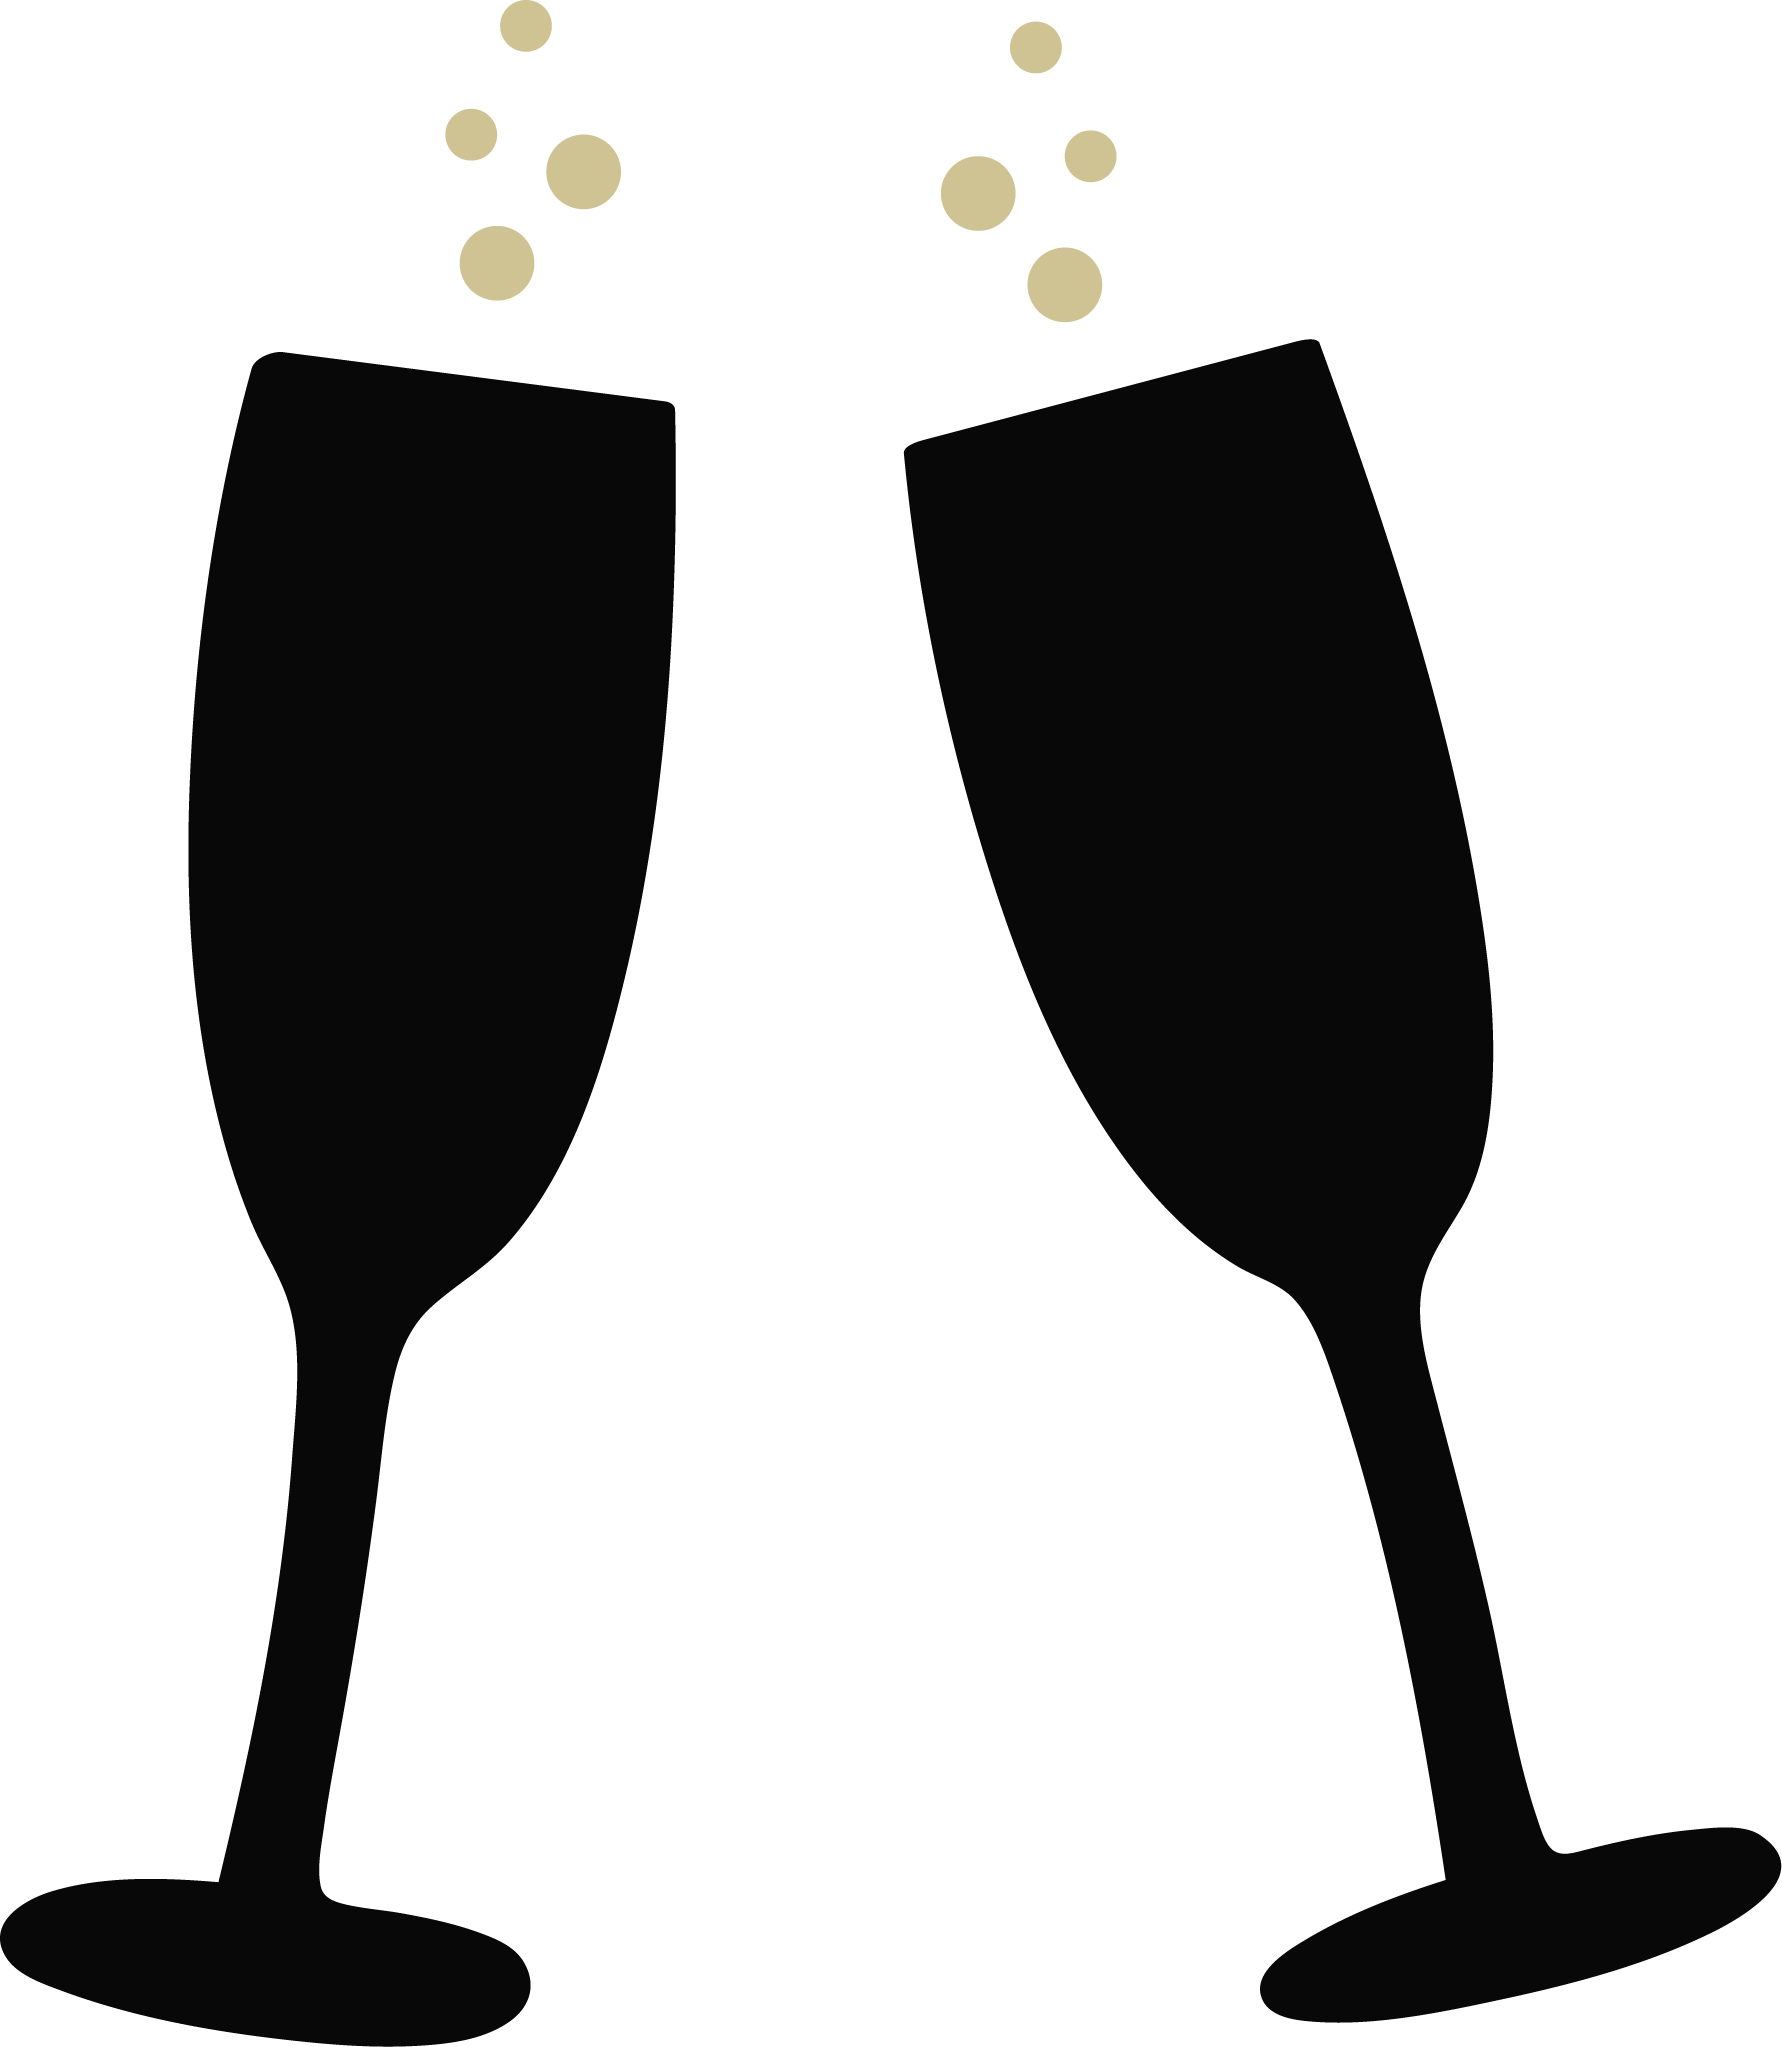 Champagne Glasses Toasting. Plan an Iconic Event at The Champagne Barn in Harrisburg, MO.